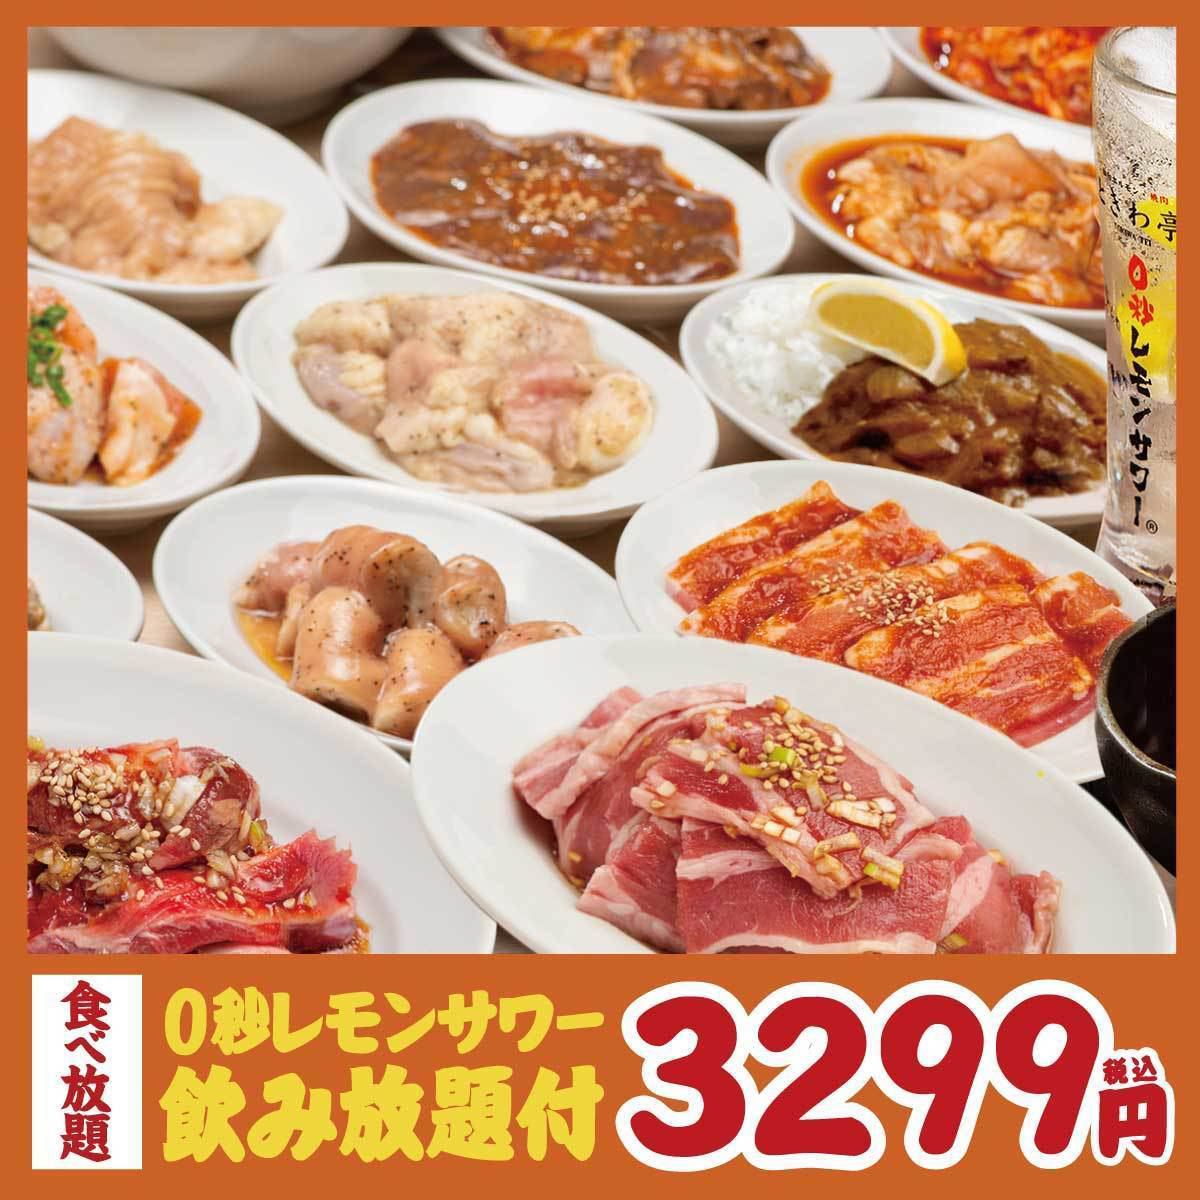 All you can eat and drink for 3,299 yen ☆ Not only for various banquets but also for families and girls' night out.